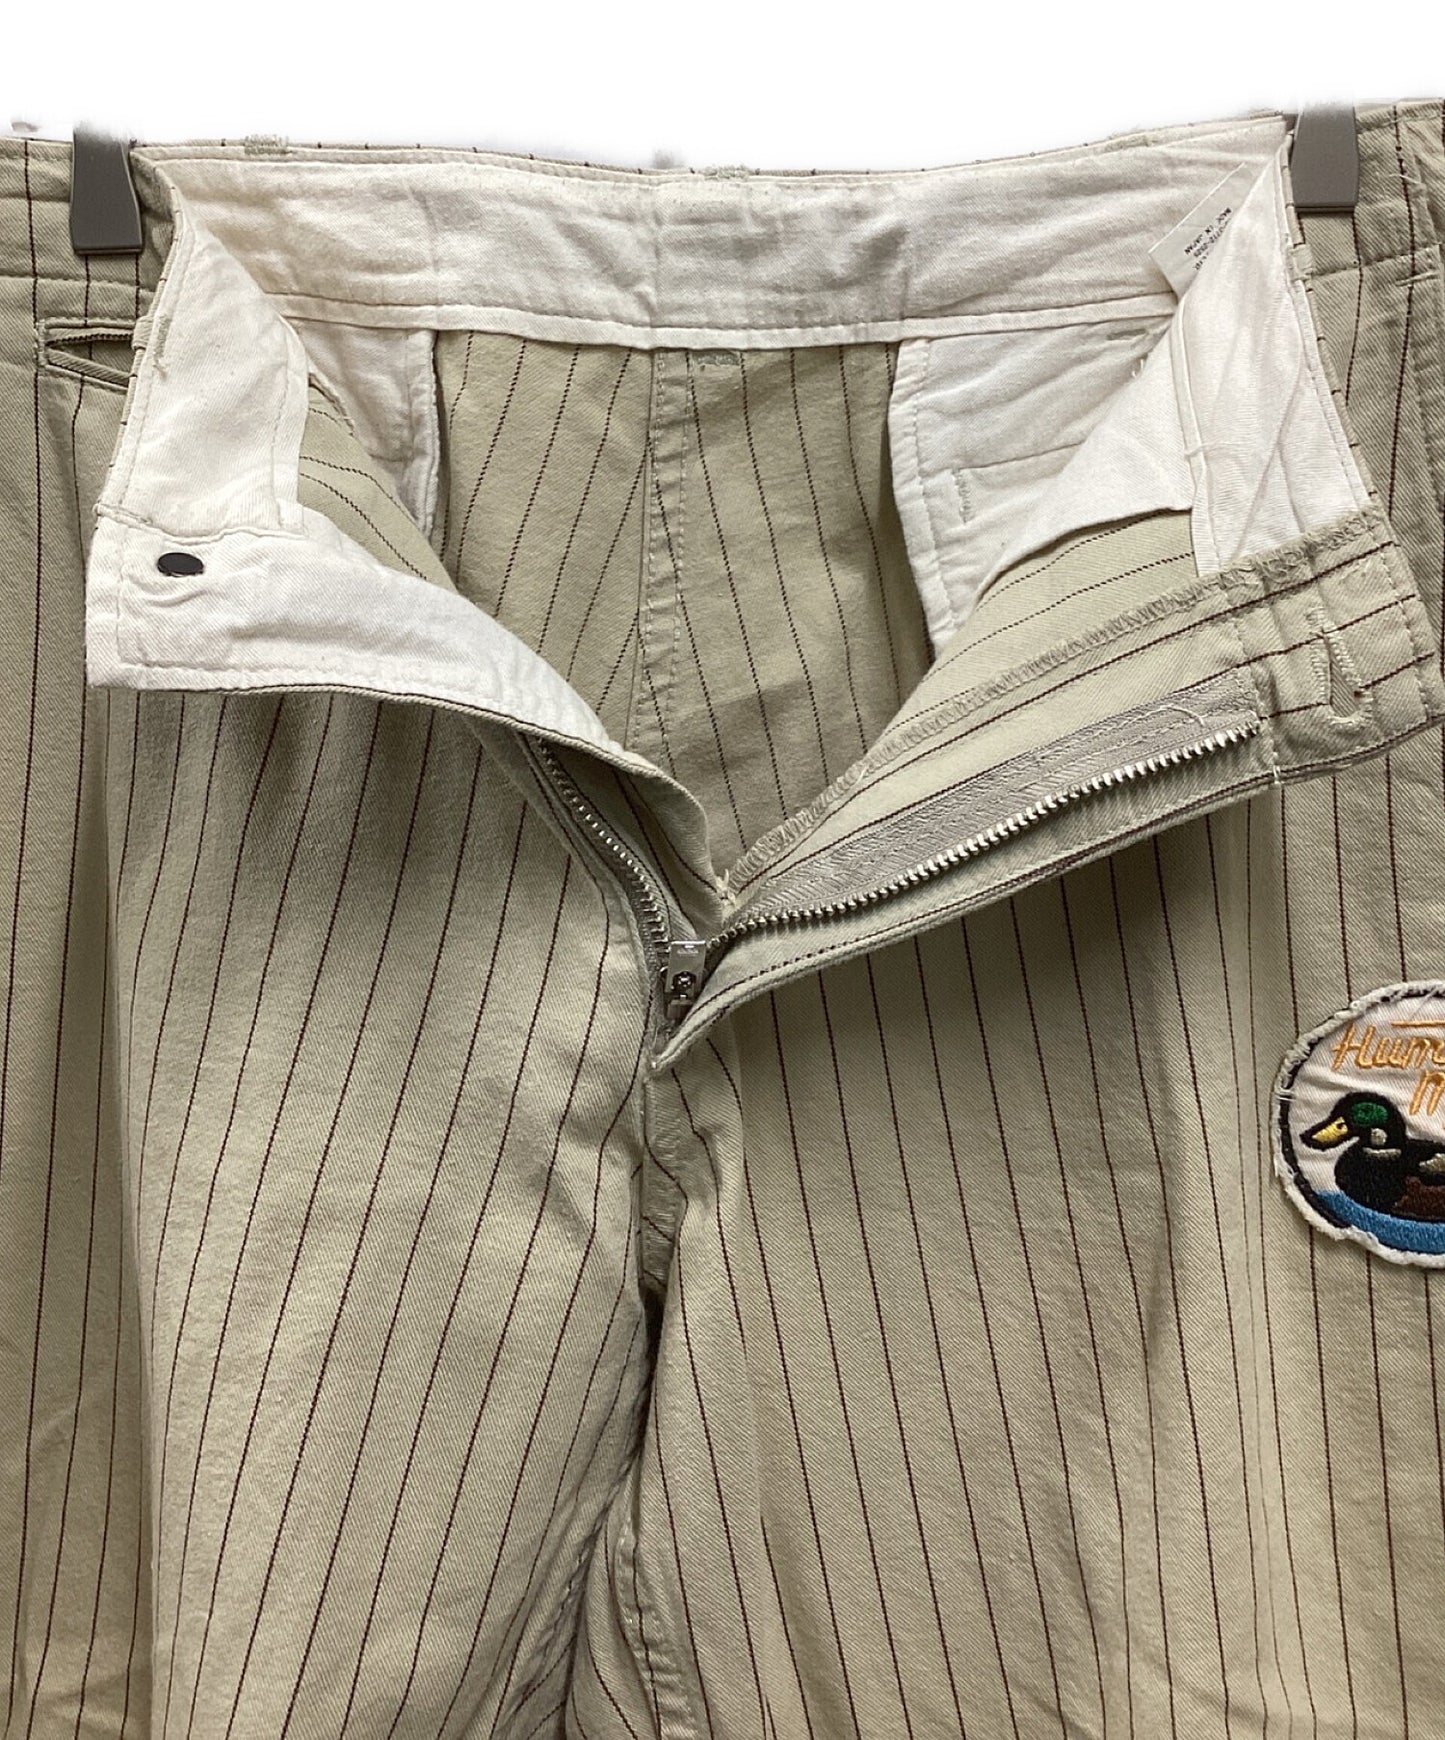 [Pre-owned] HUMAN MADE striped work pants